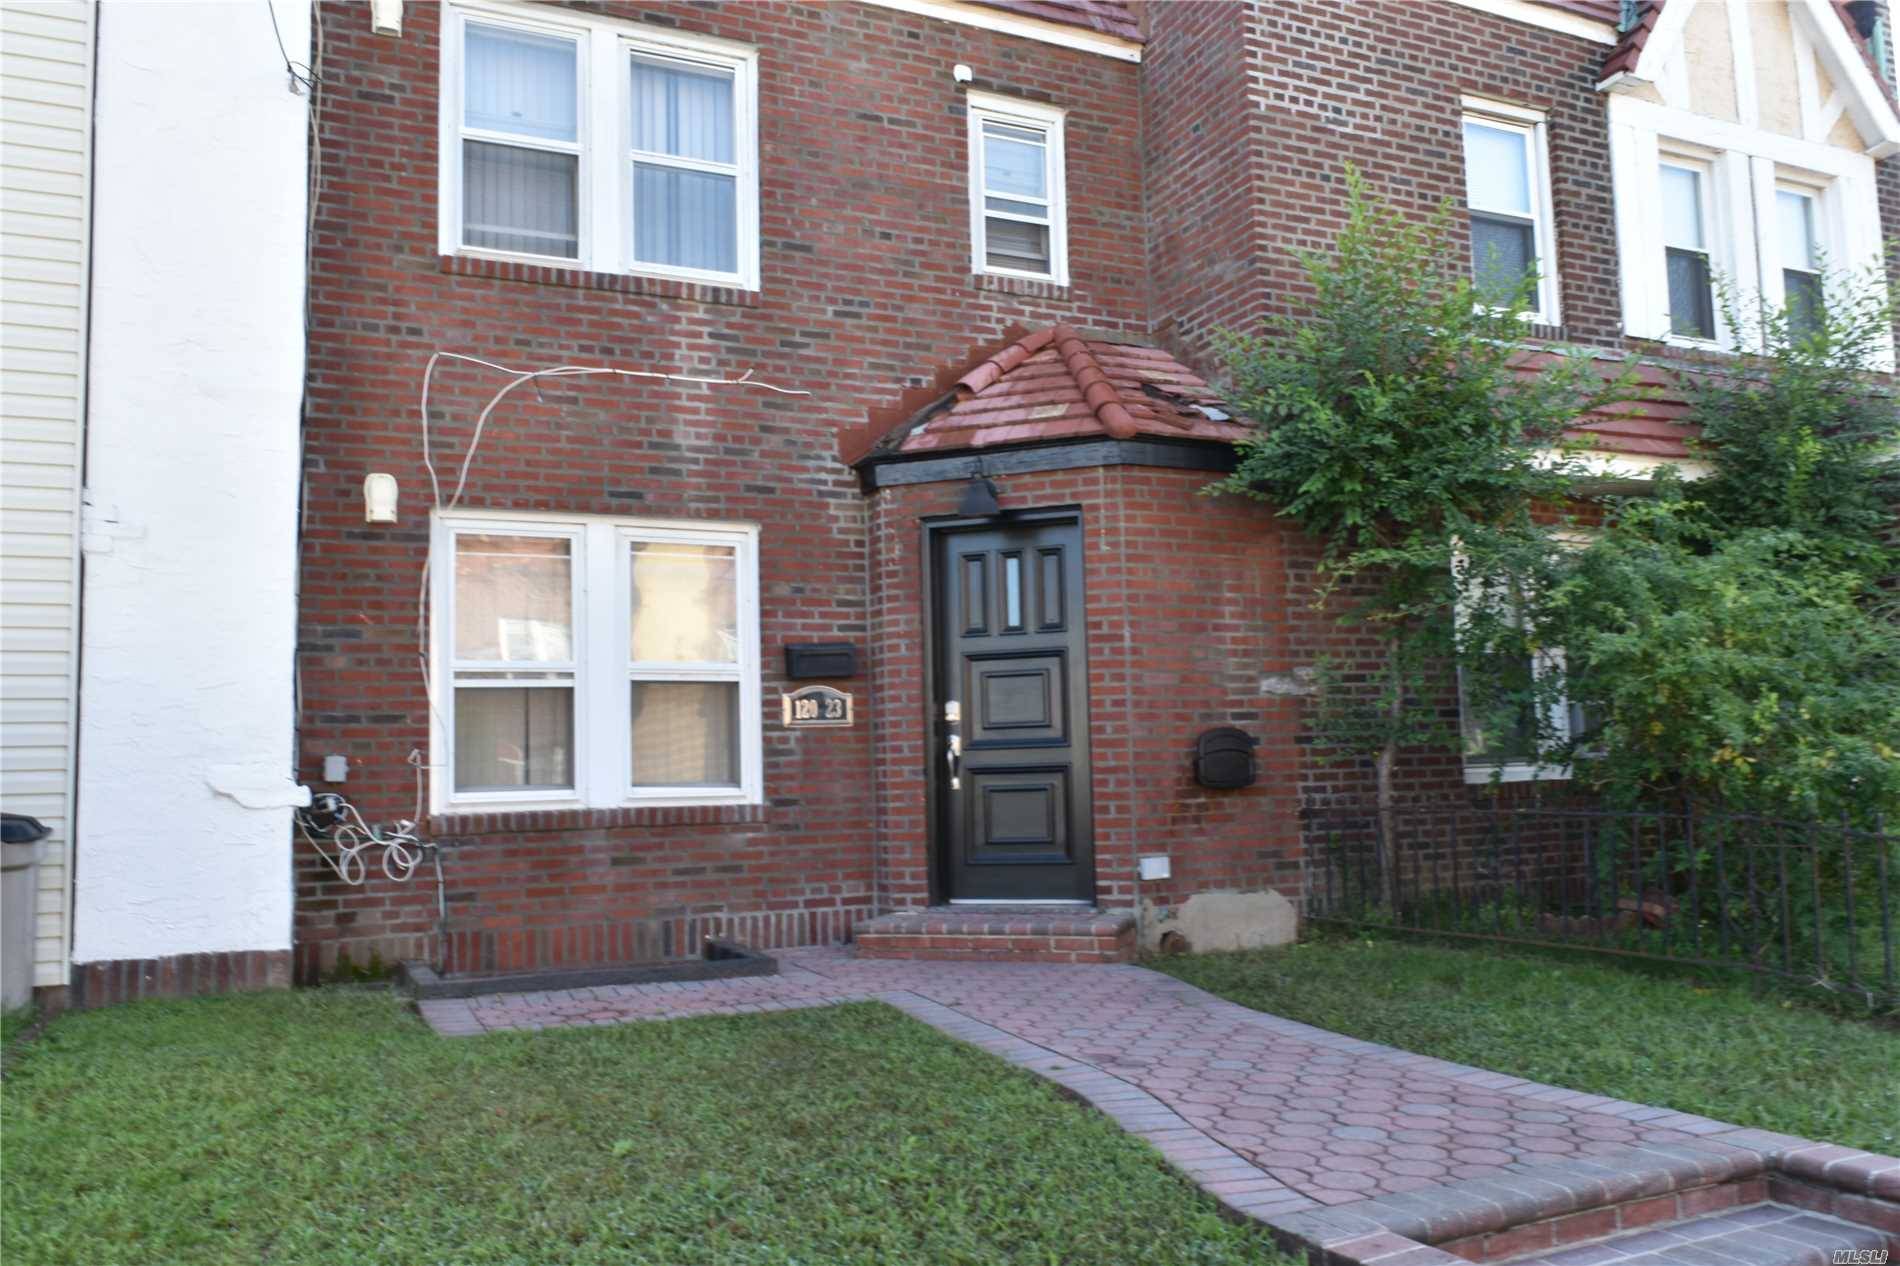 Meticulously Maintained Attached Brick Colonial Feat.